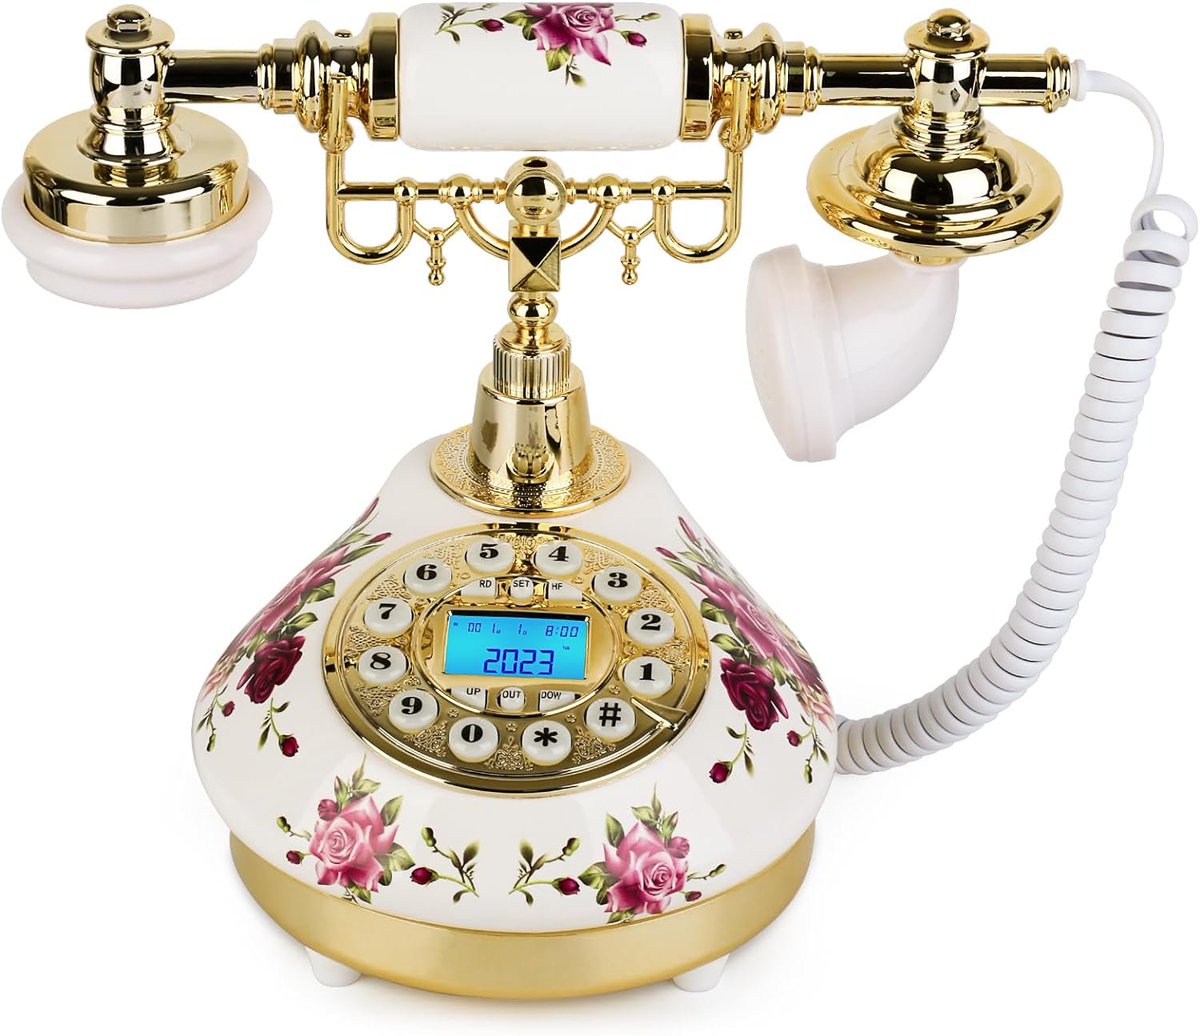 Sangyn Vintage Landline Phone Retro Phone Antique Telephone with Push Button Old Fashioned Landline Telephone with LCD Display Ceramic Corded Telephones for Home Office Cafe Bar Hotel amzn.to/4bciy8d via @amazon #affiliate #NationalTelephoneDay